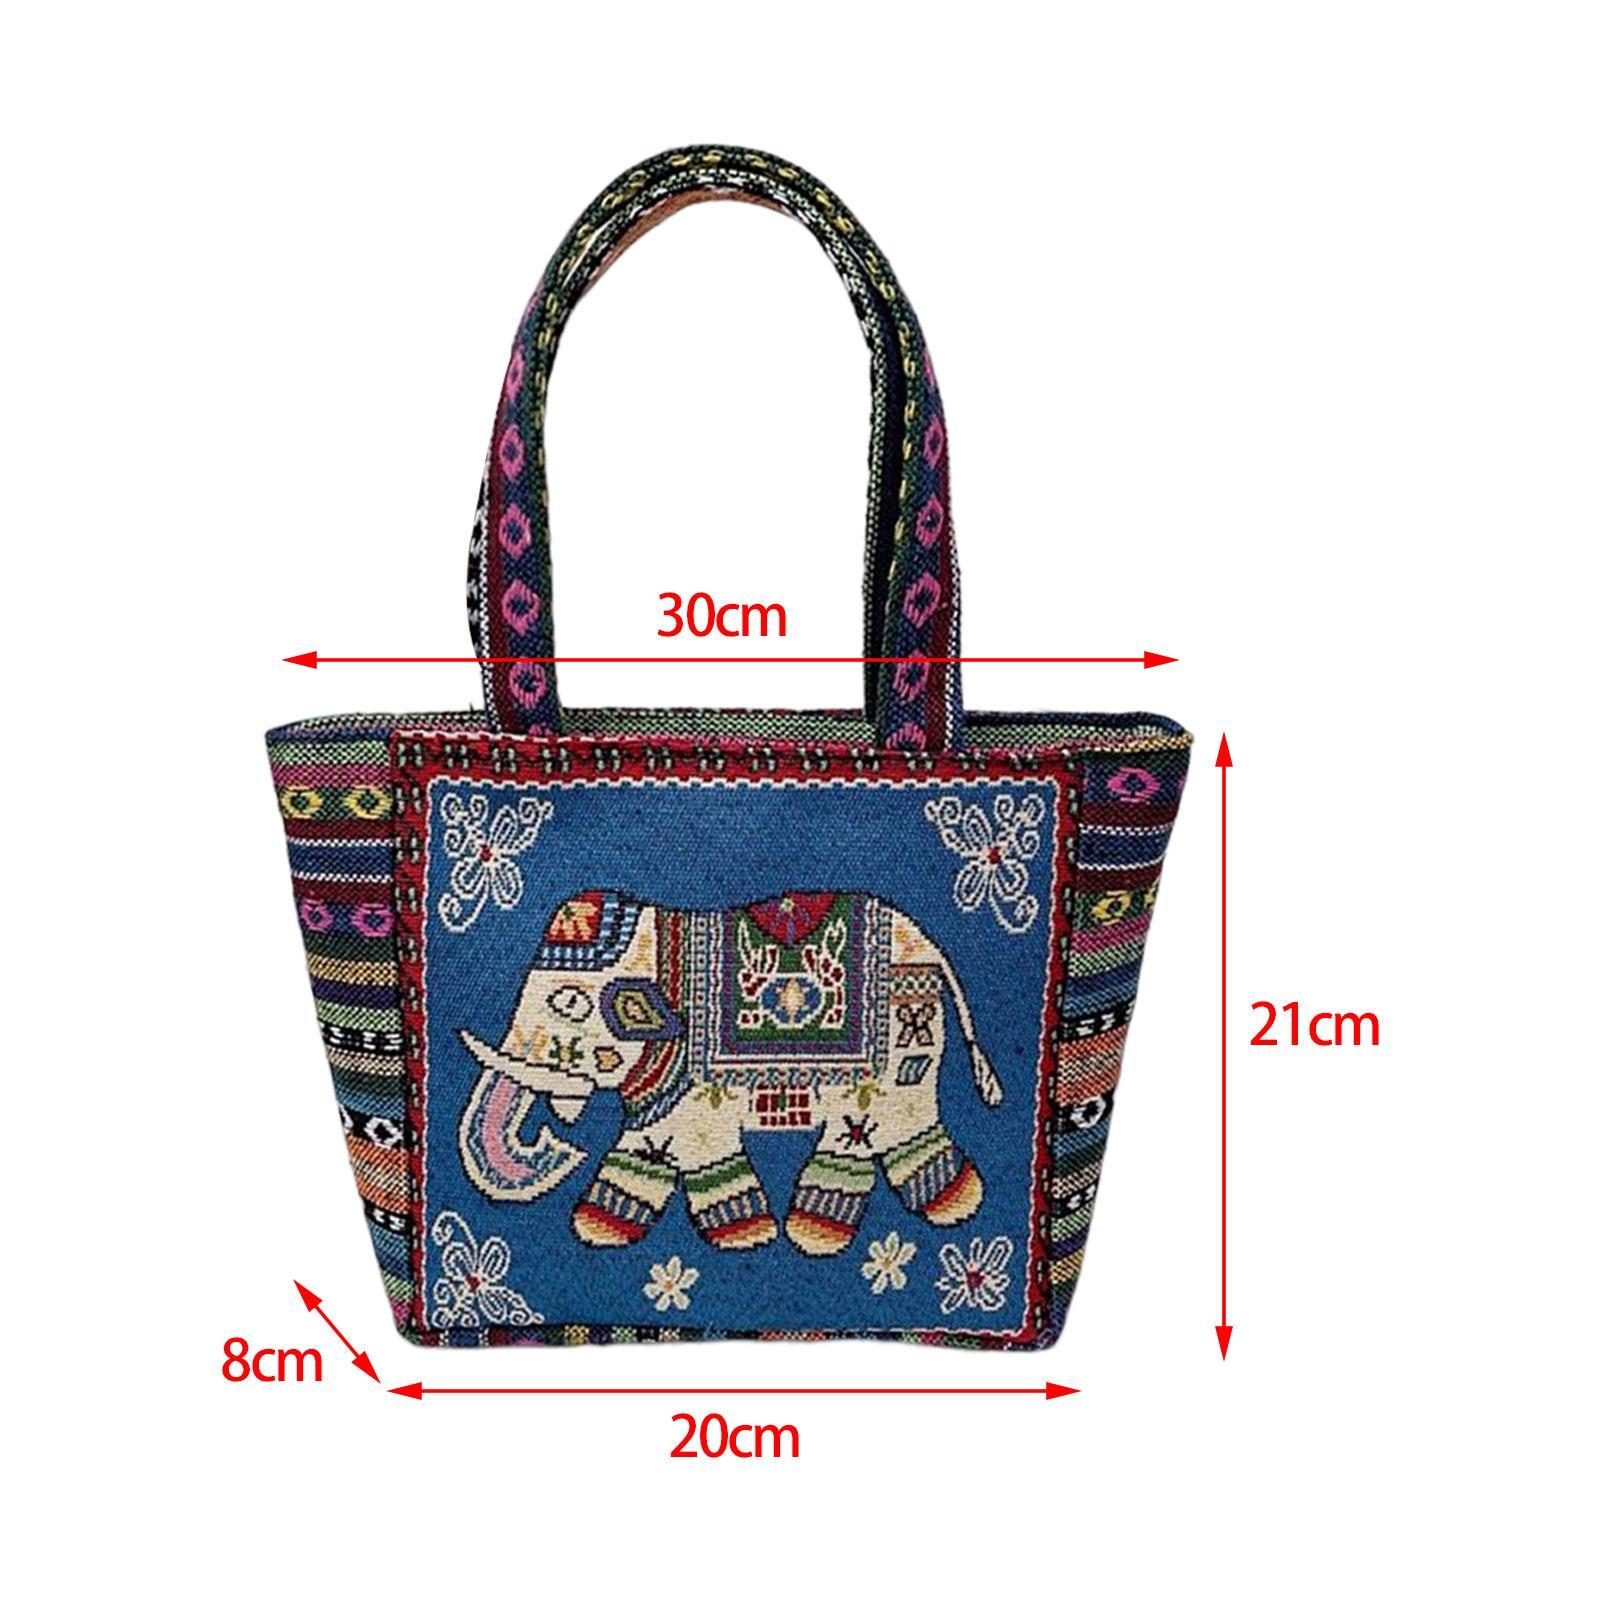 Canvas Tote Bag Shoulder Bag with Inner Pocket, Reusable Retro Aesthetic Cute Purse Embroidered Tote for Shopping, Travel, Vacation, Party, Beach